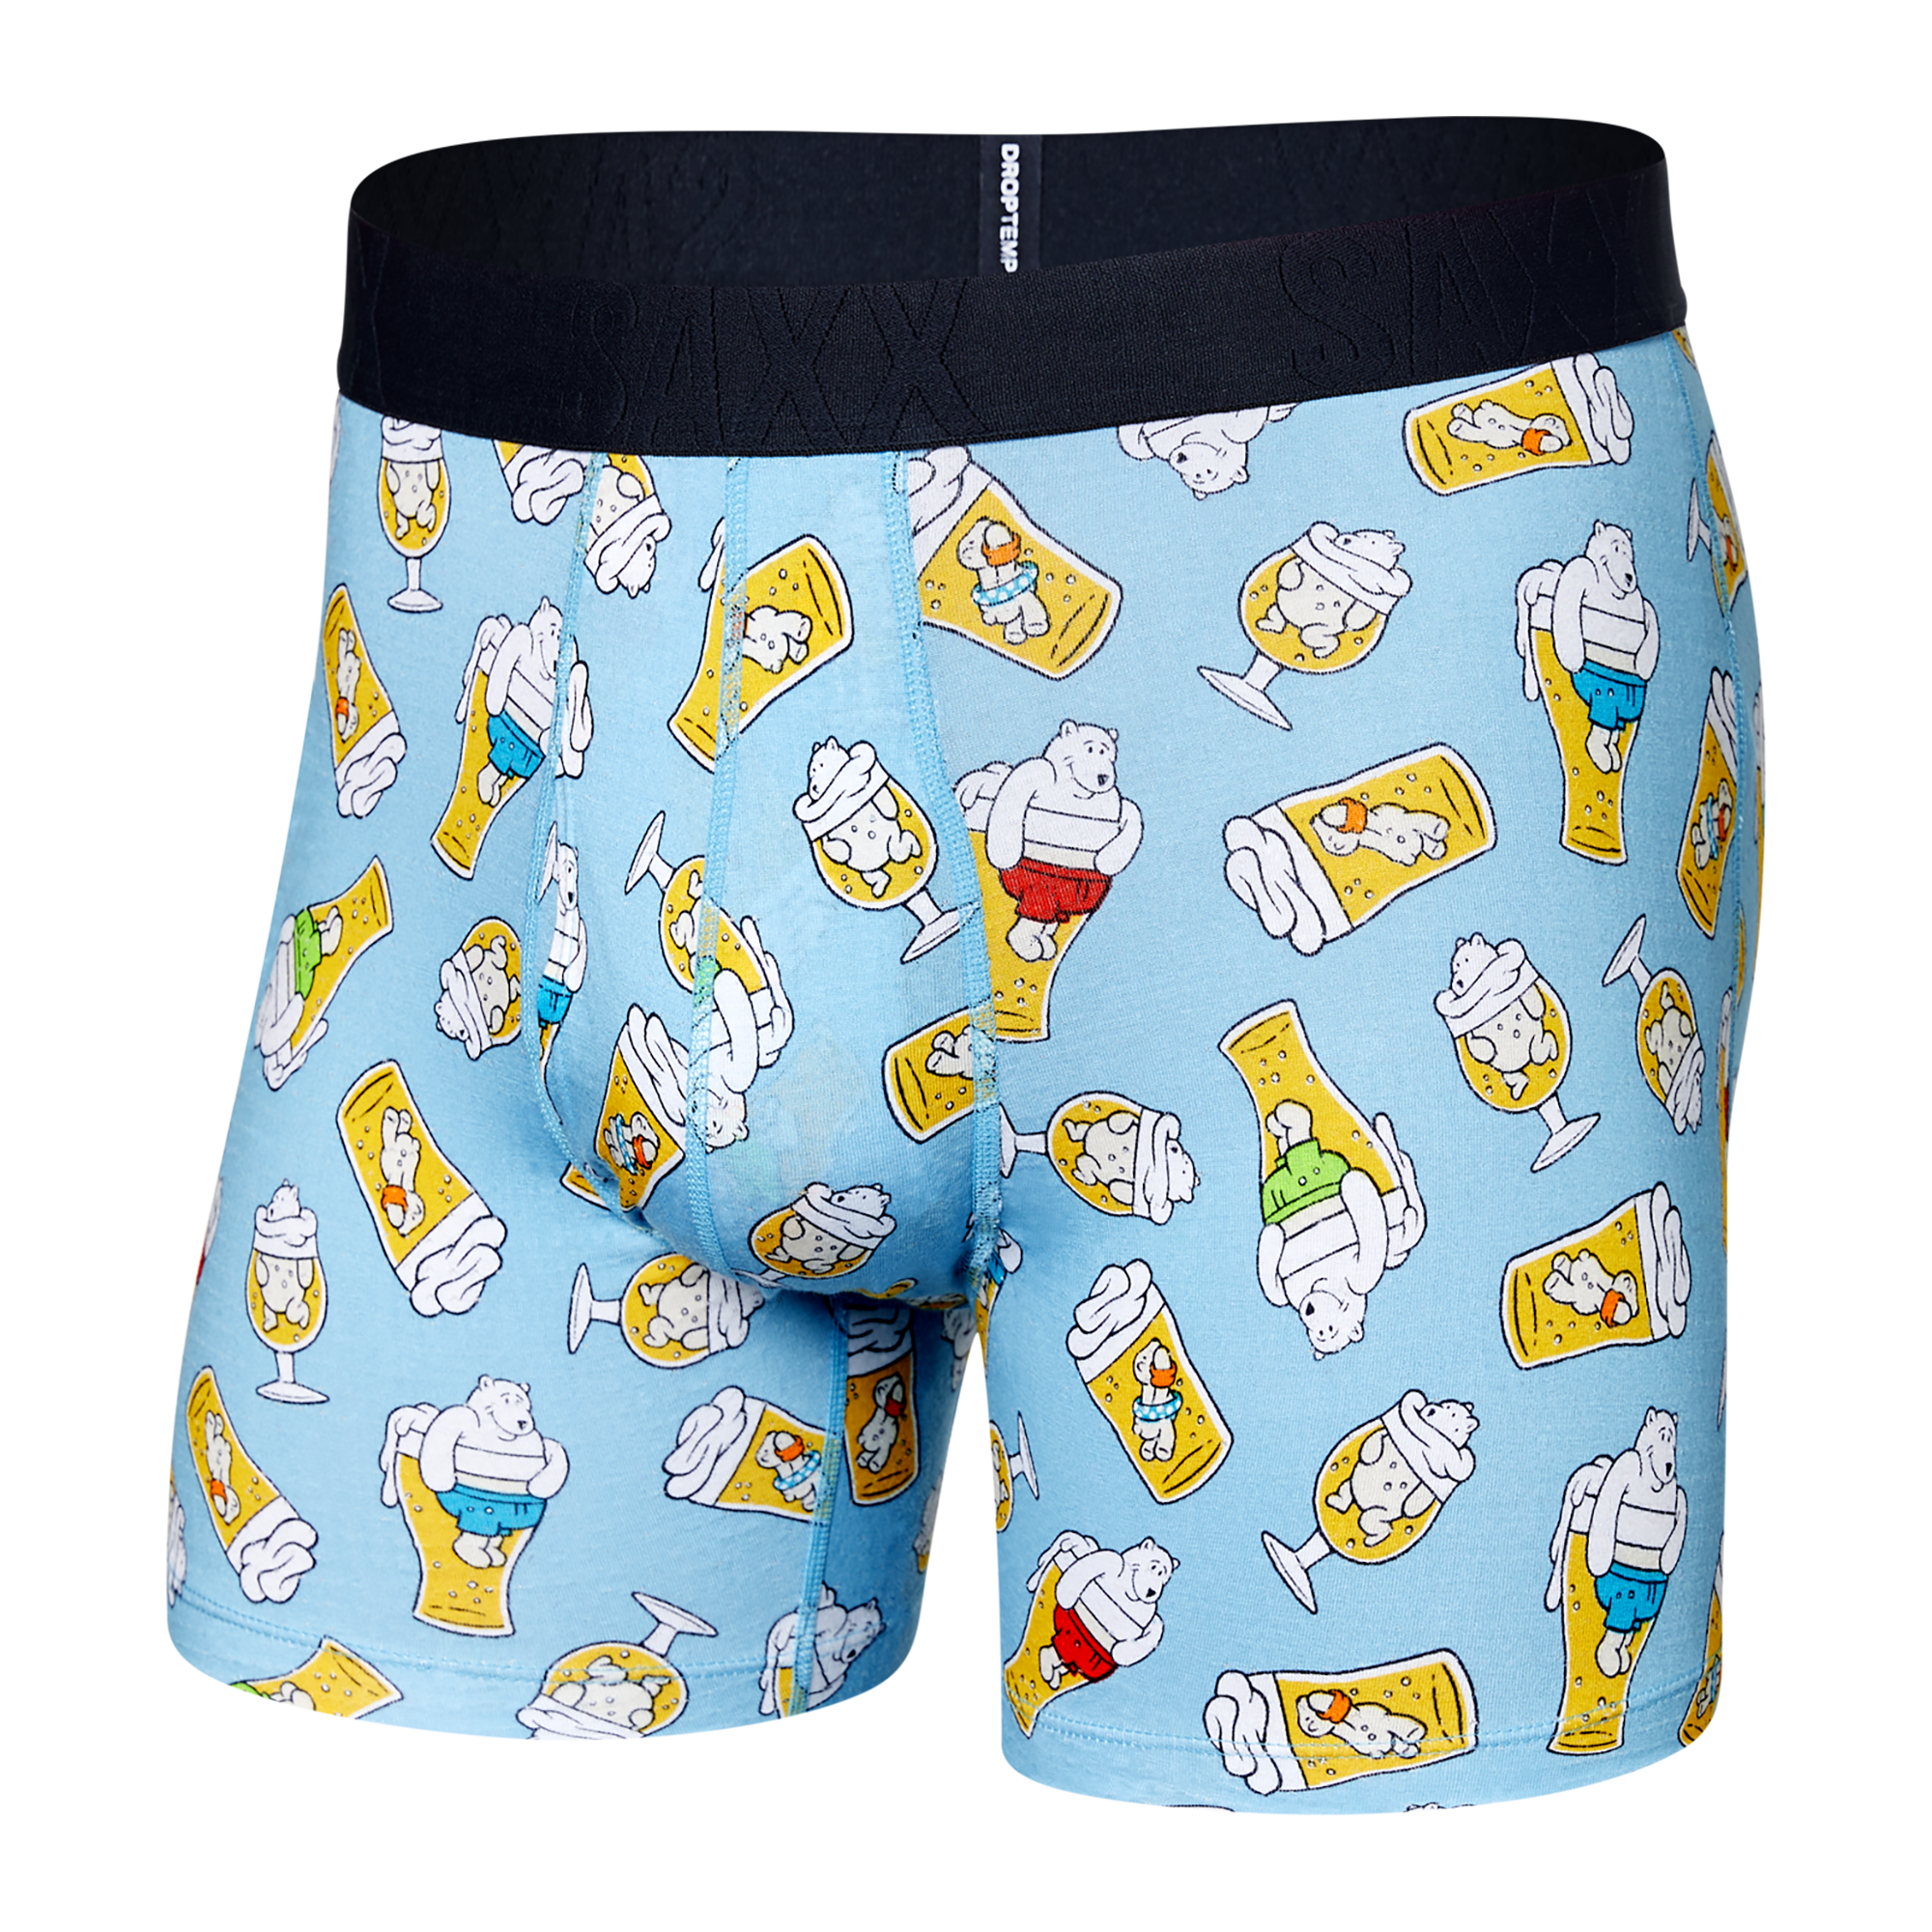 Front of DropTemp Cooling Cotton Boxer Brief in Polar Beers- Blue